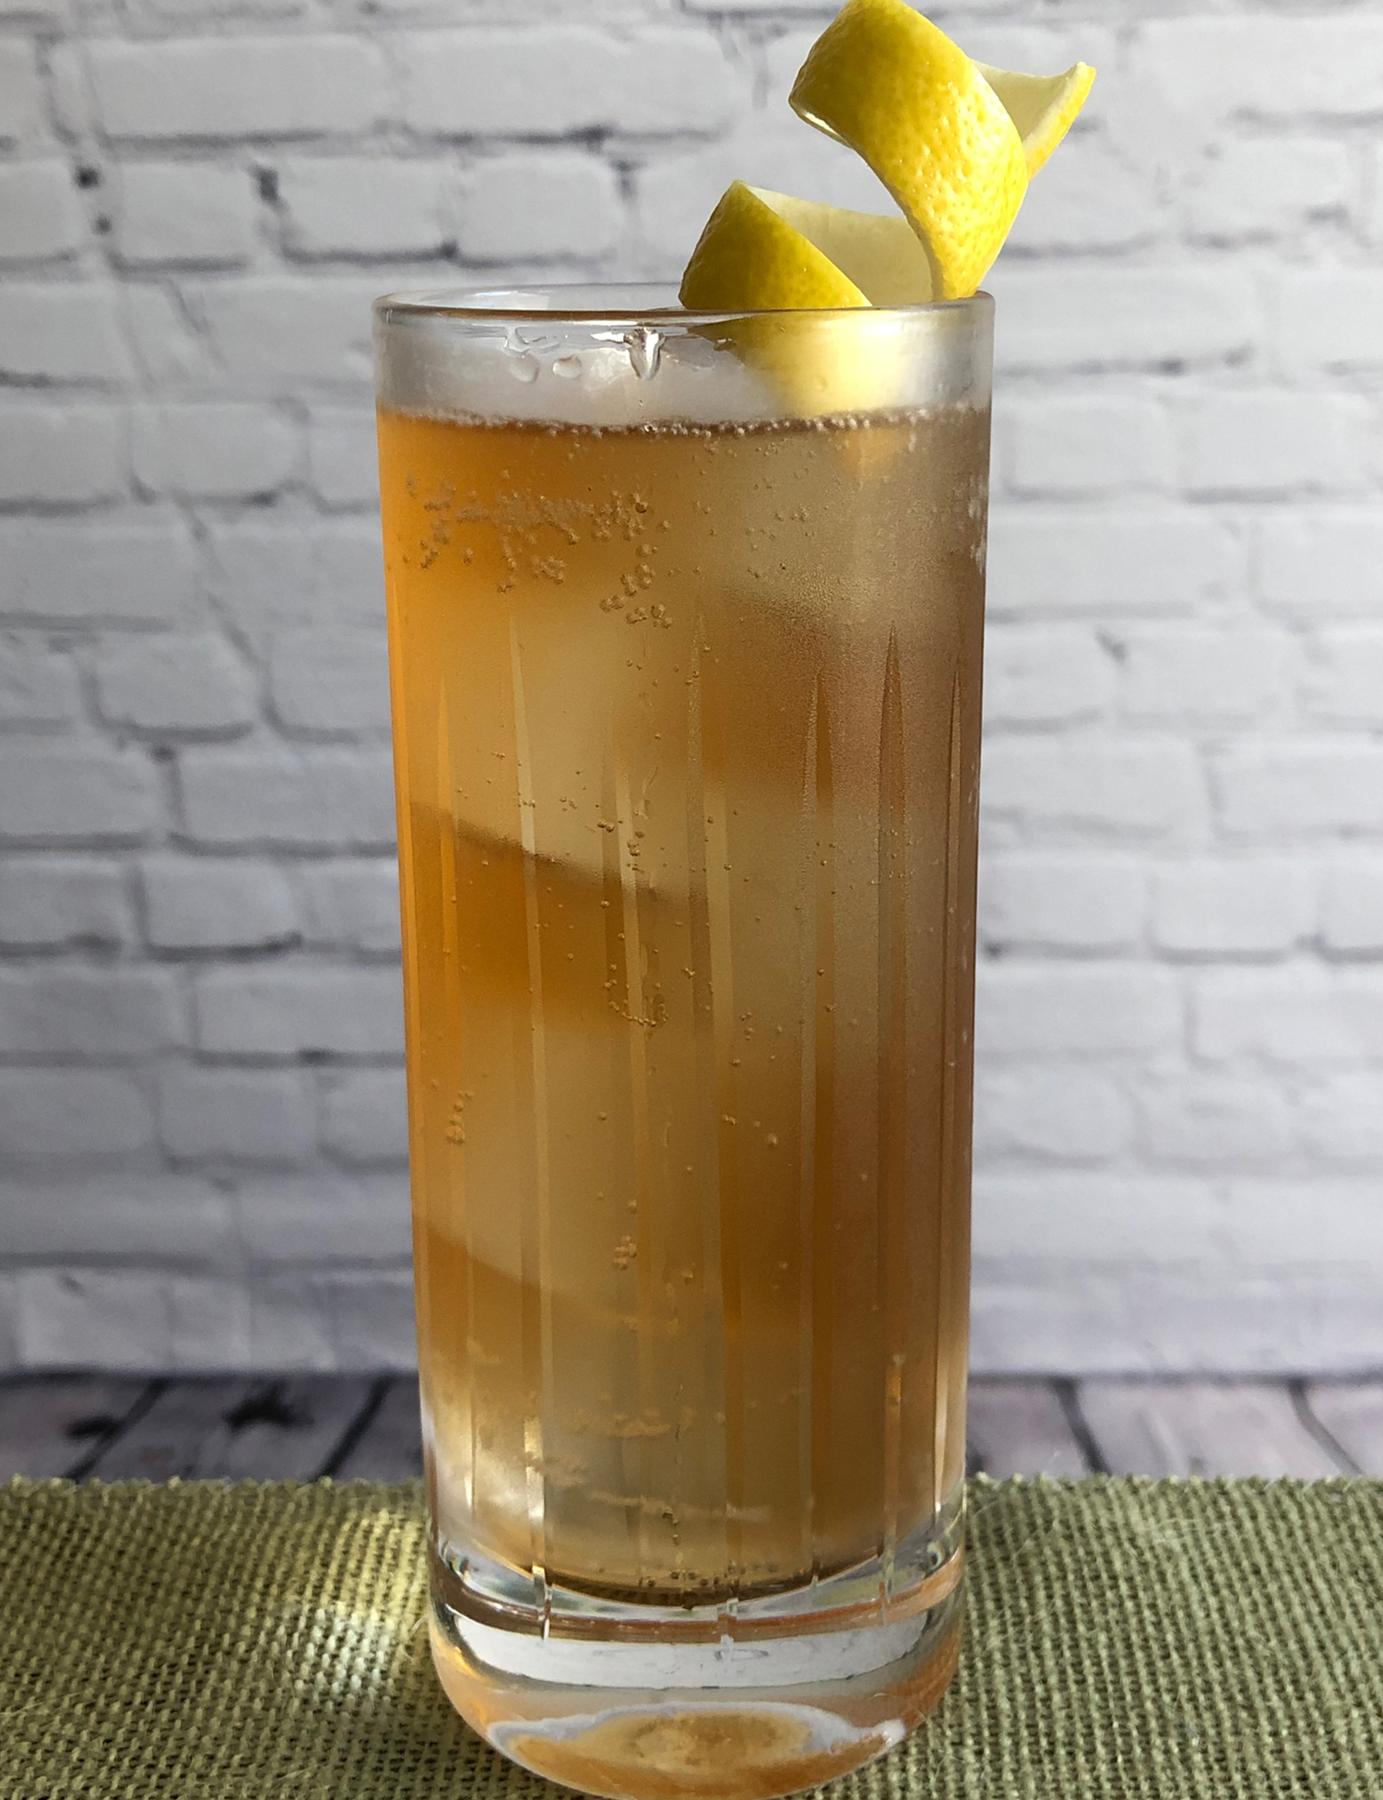 An example of the Shikoku, the mixed drink (drink), by Charles Coykendall, Benedetto, Cambridge, MA, featuring soda water, japanese whisky, Mattei Cap Corse Rouge Quinquina, and lemon twist; photo by Lee Edwards